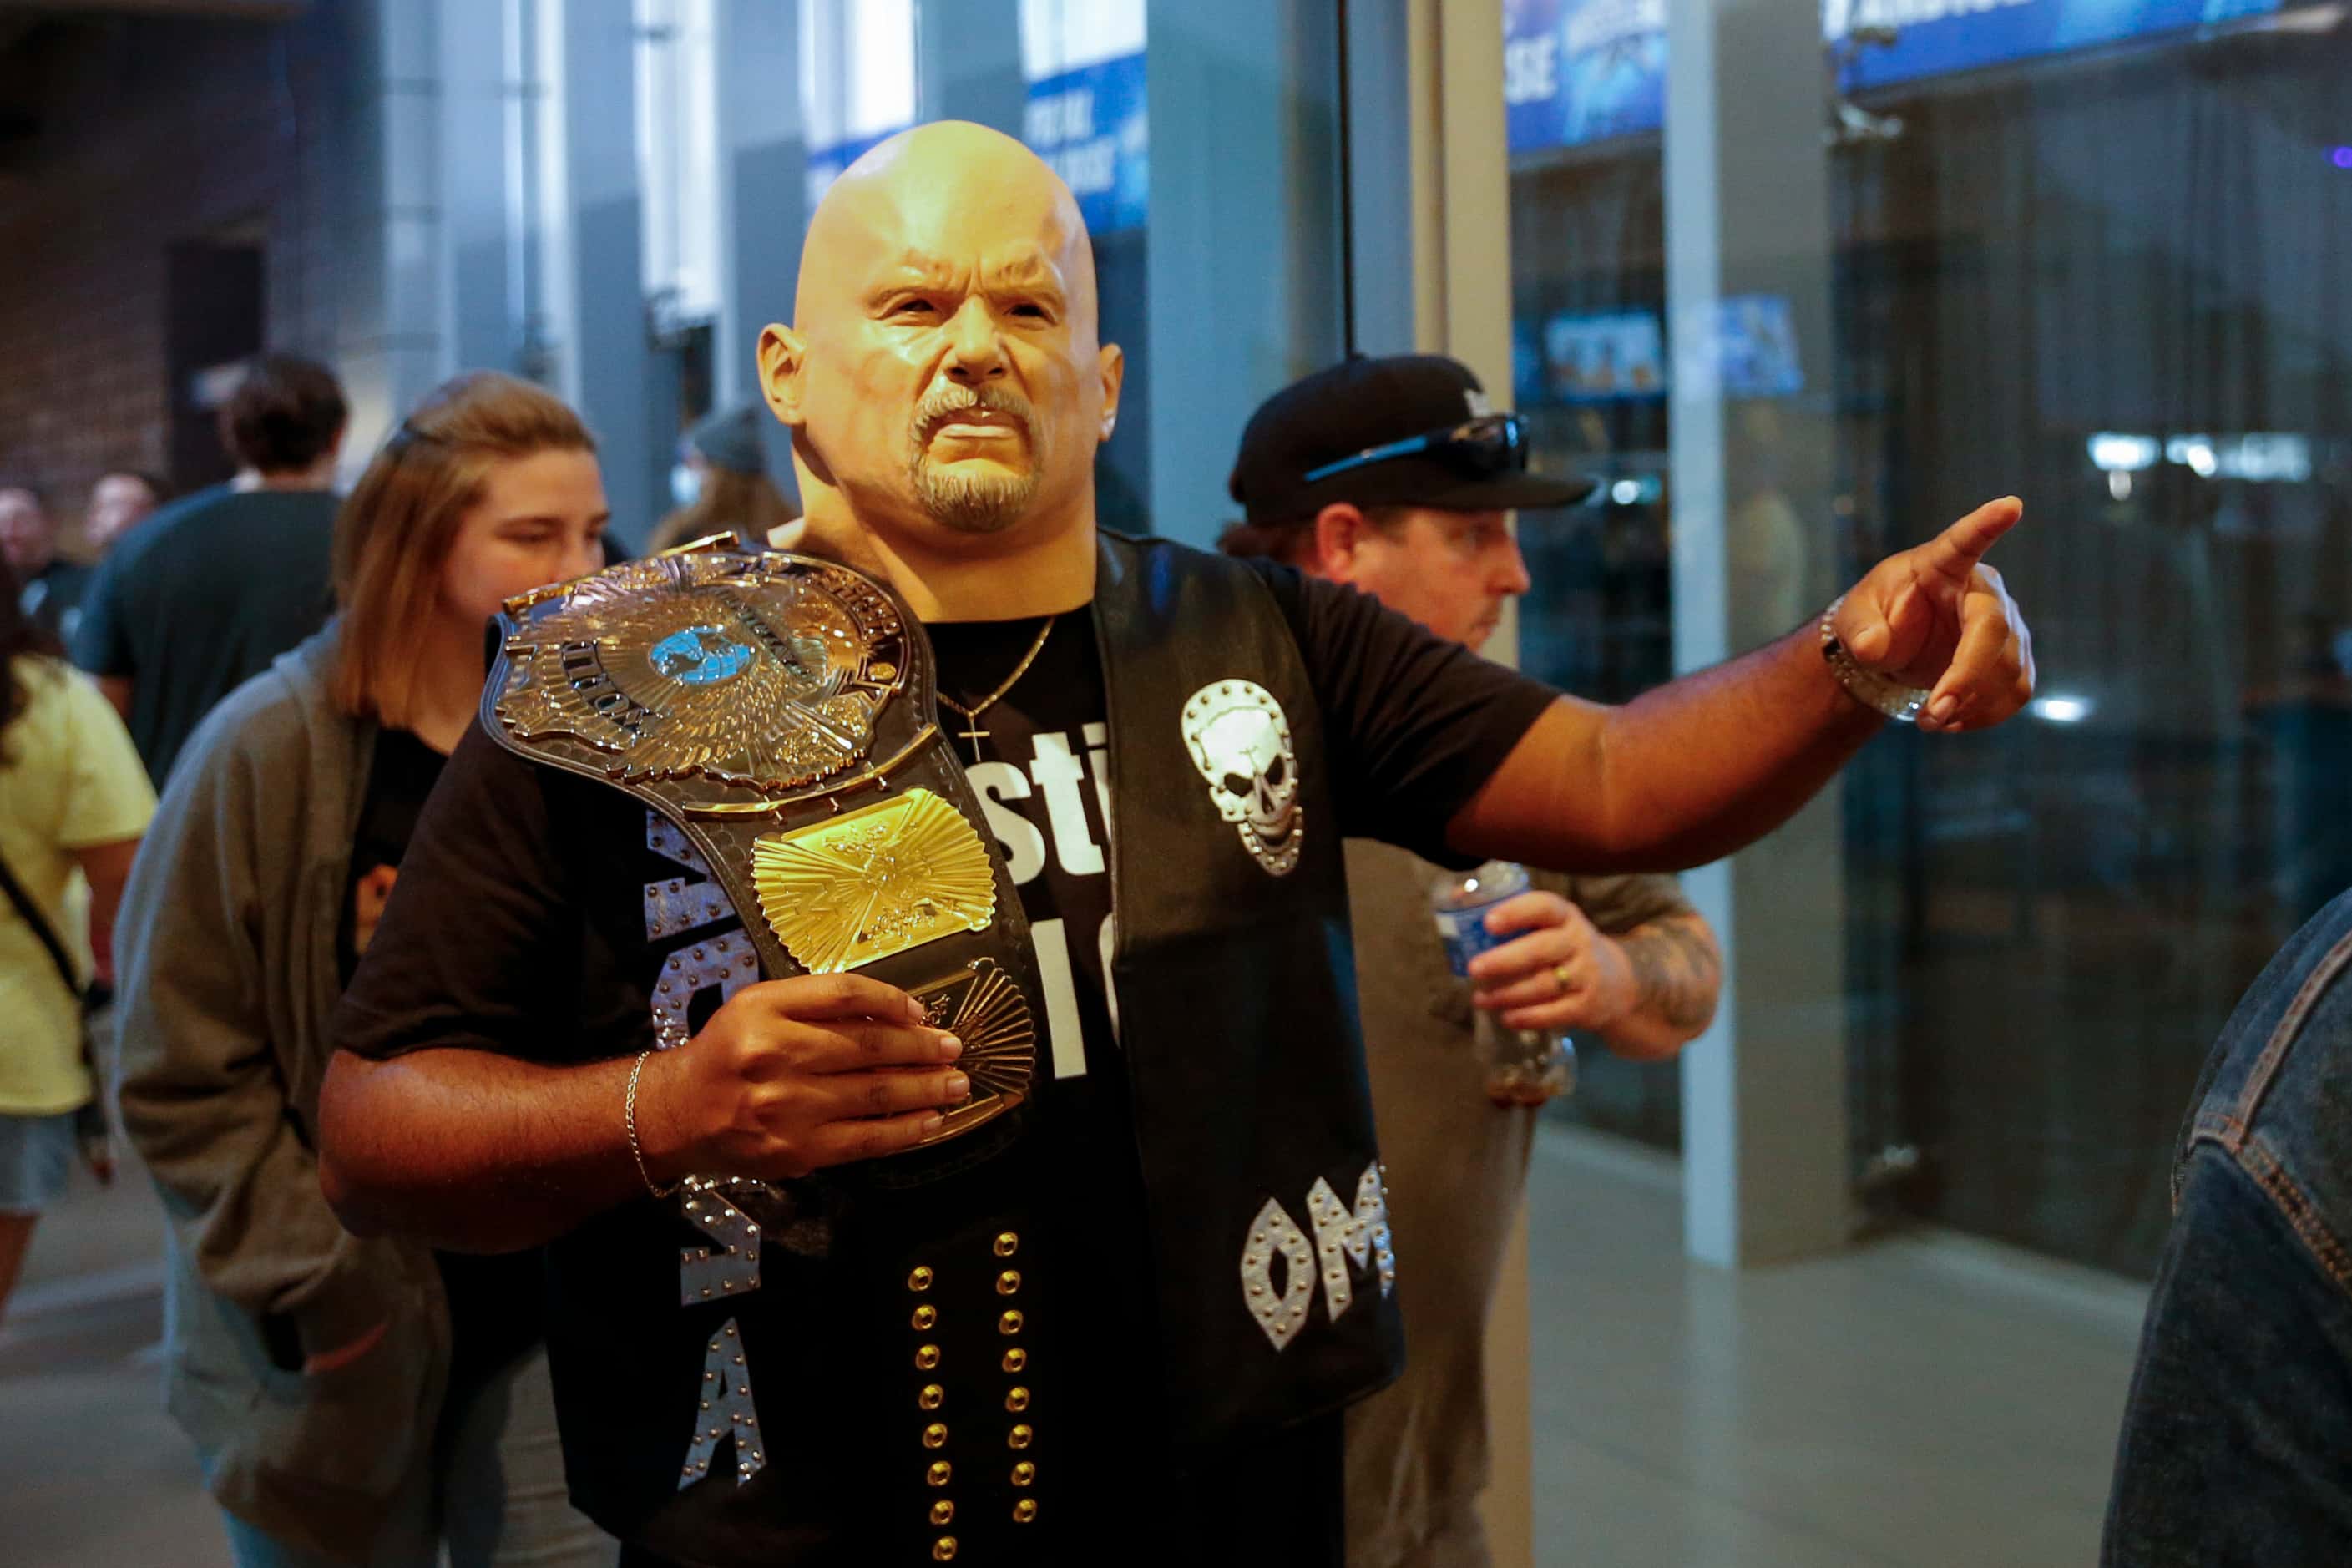 Ari Frazier, 35, poses while wearing a “Stone Cold” Steve Austin mask and vest before...